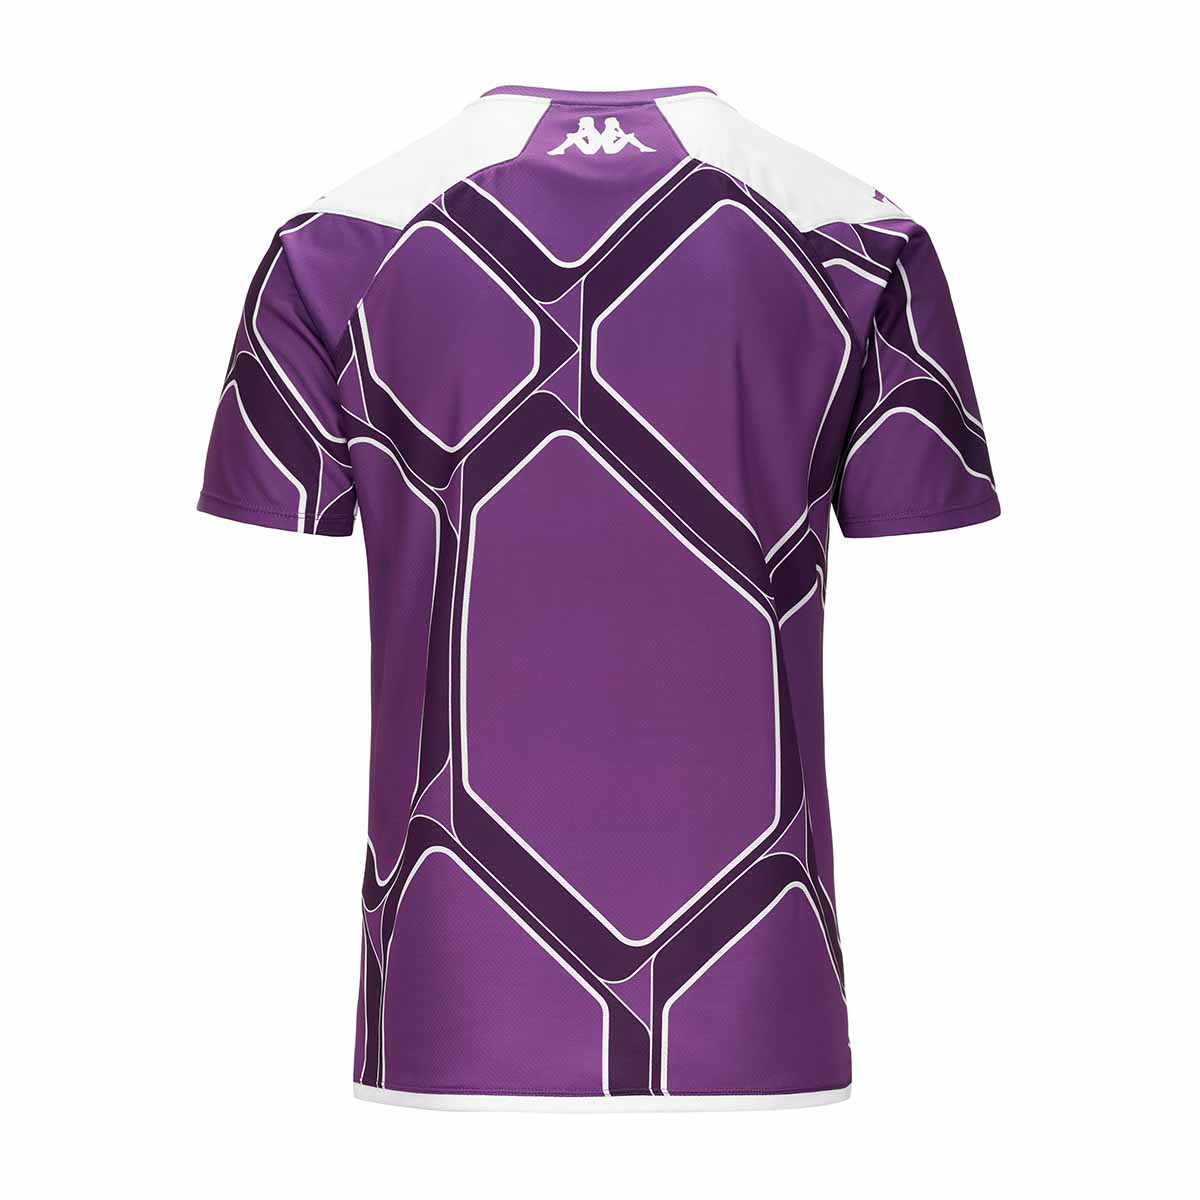 Maillot Aboupre Pro 7 Valladolid 23/24 Violet Homme